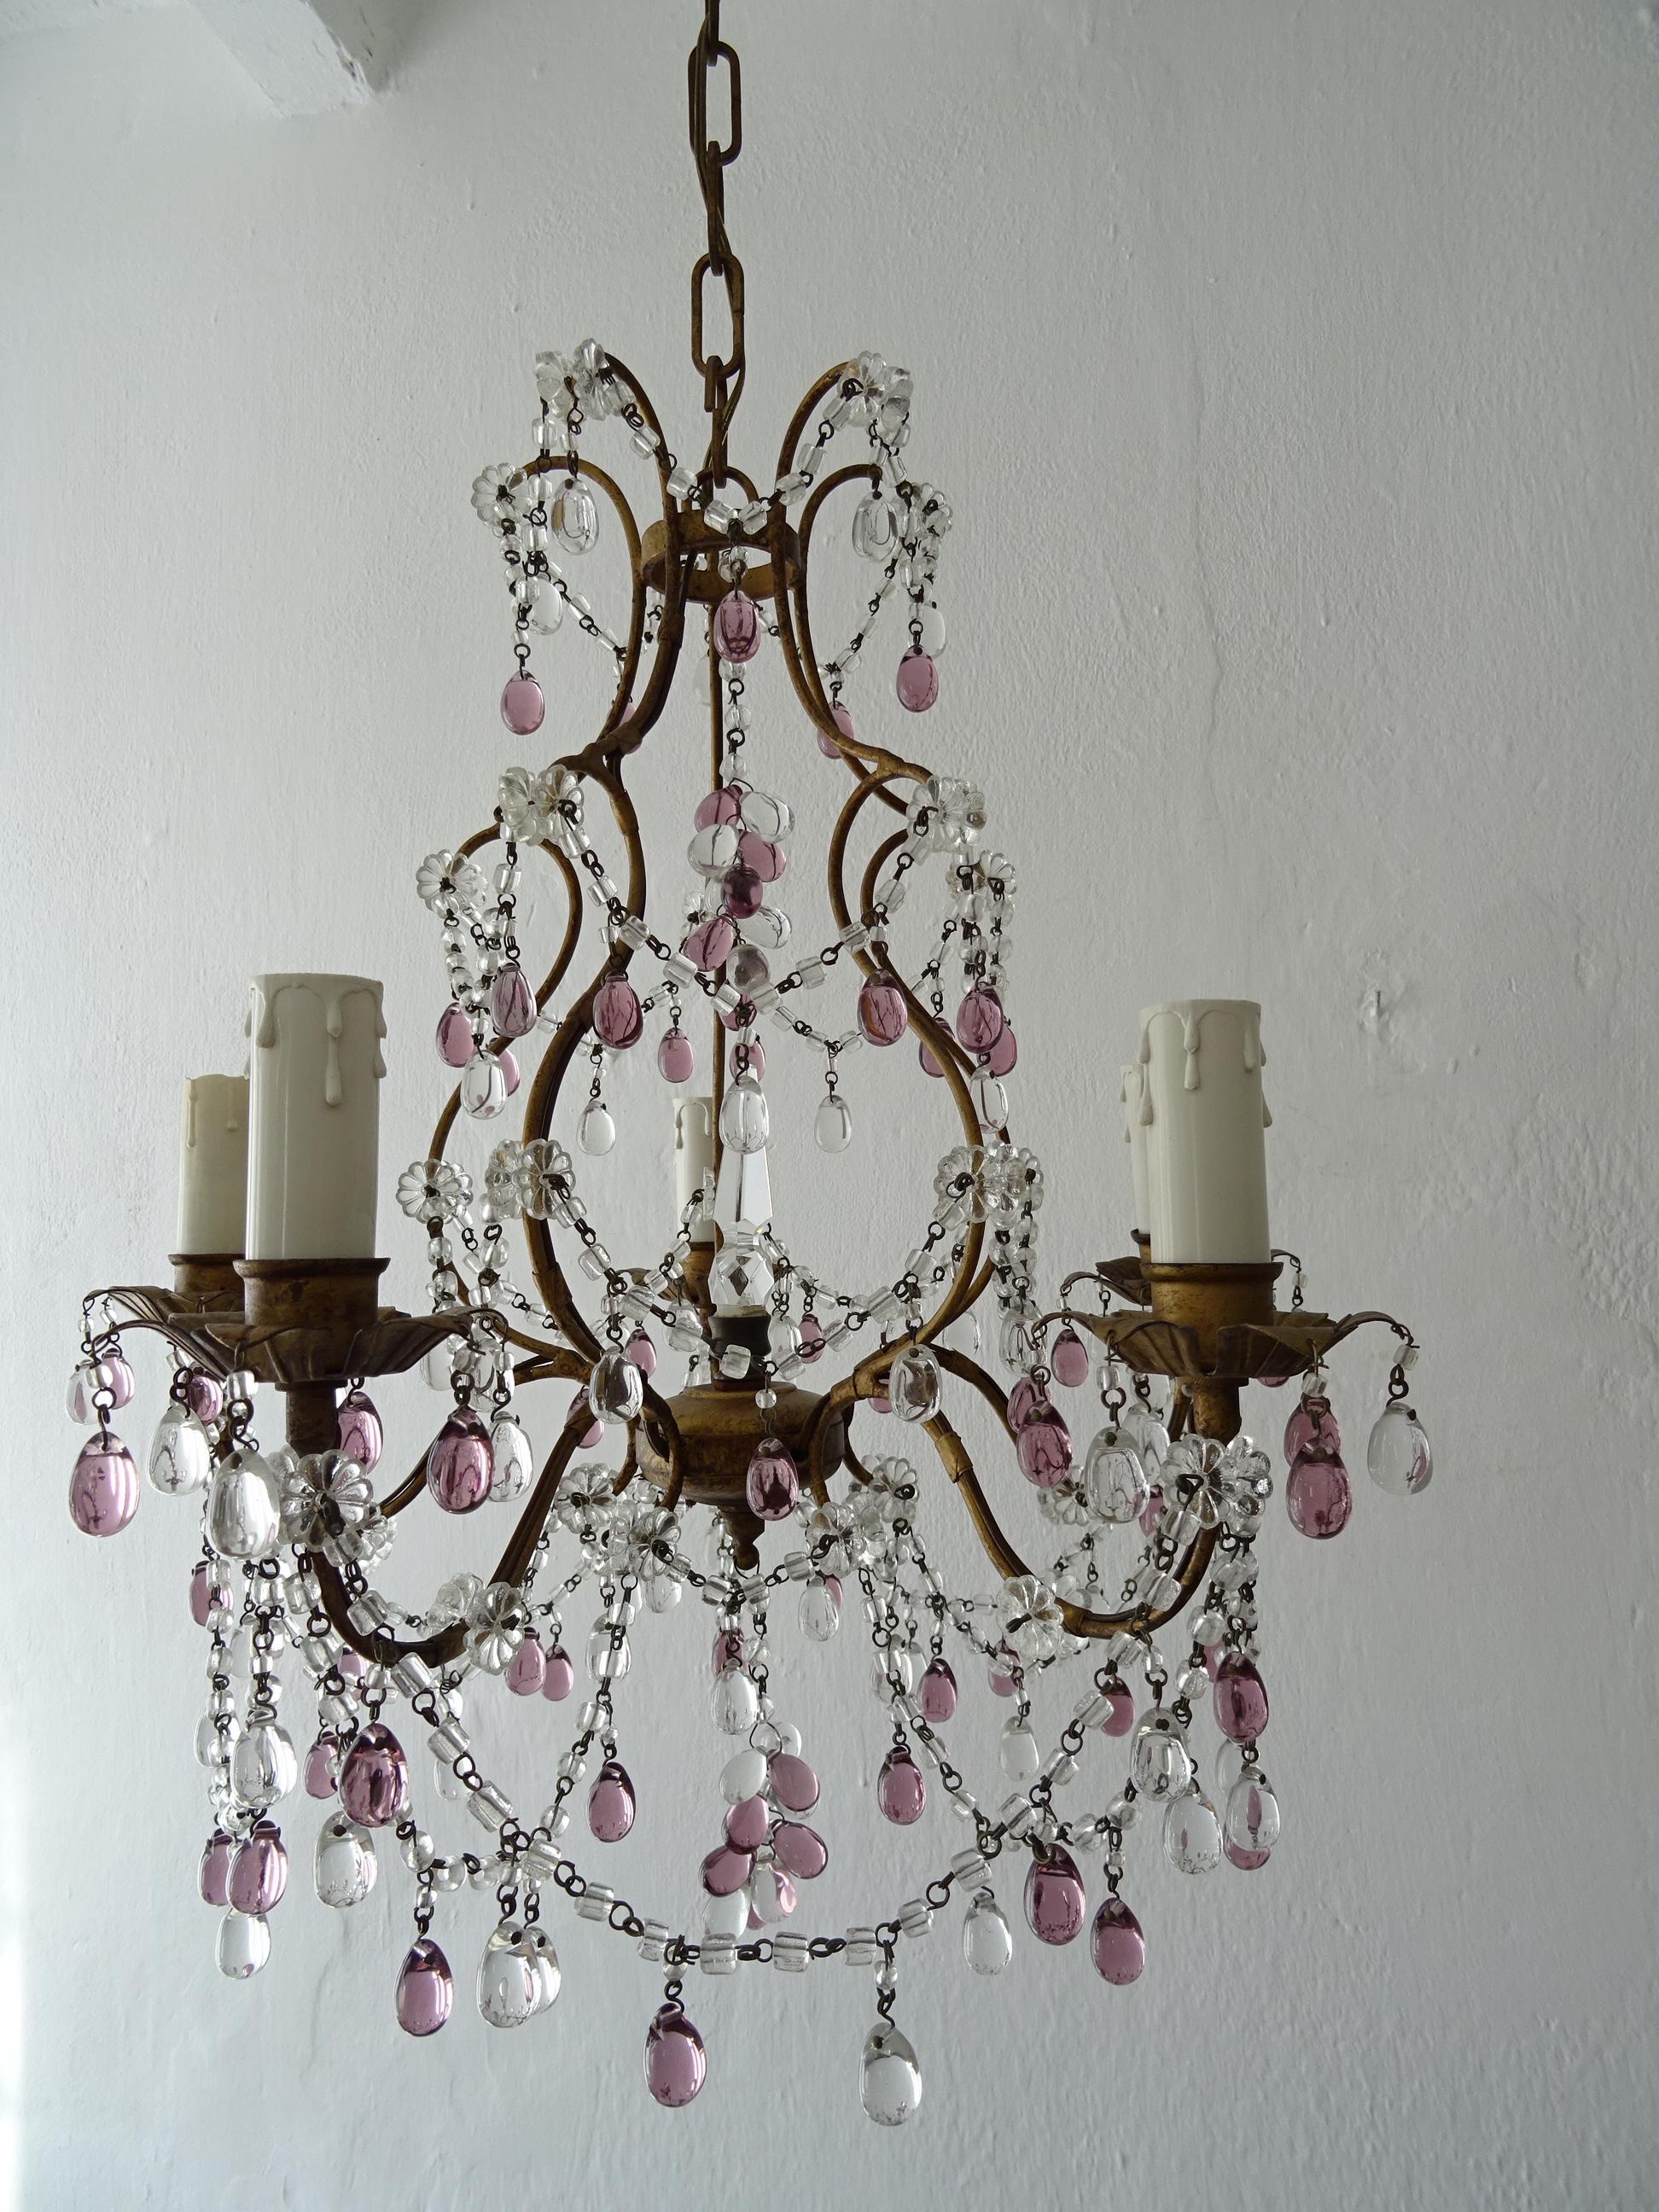 French Maison Baguès  Amethyst & Clear Murano Drops Chandelier, 1920s Signed For Sale 4